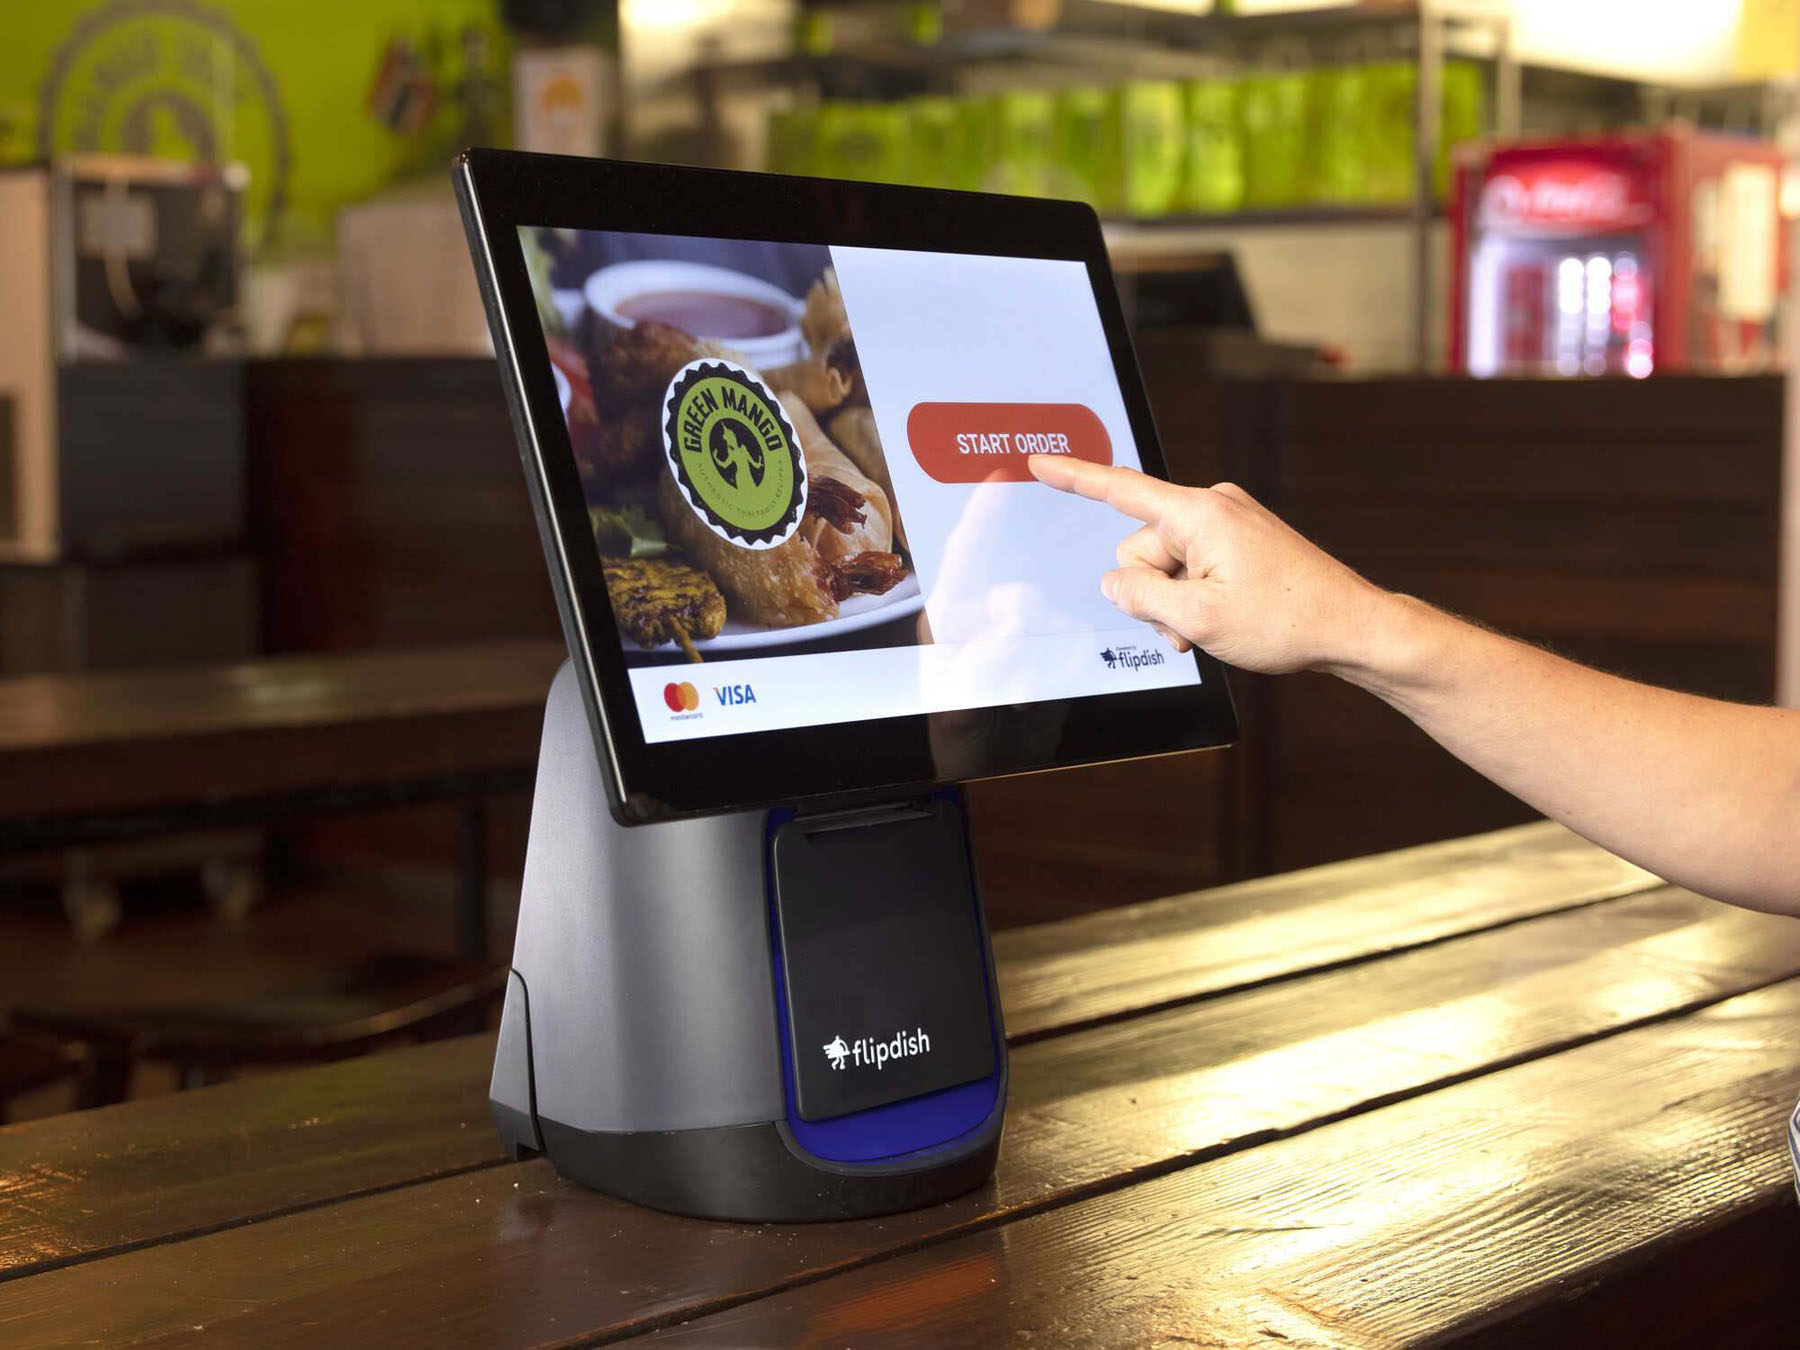 Want to learn more about Flipdish self-ordering kiosks?